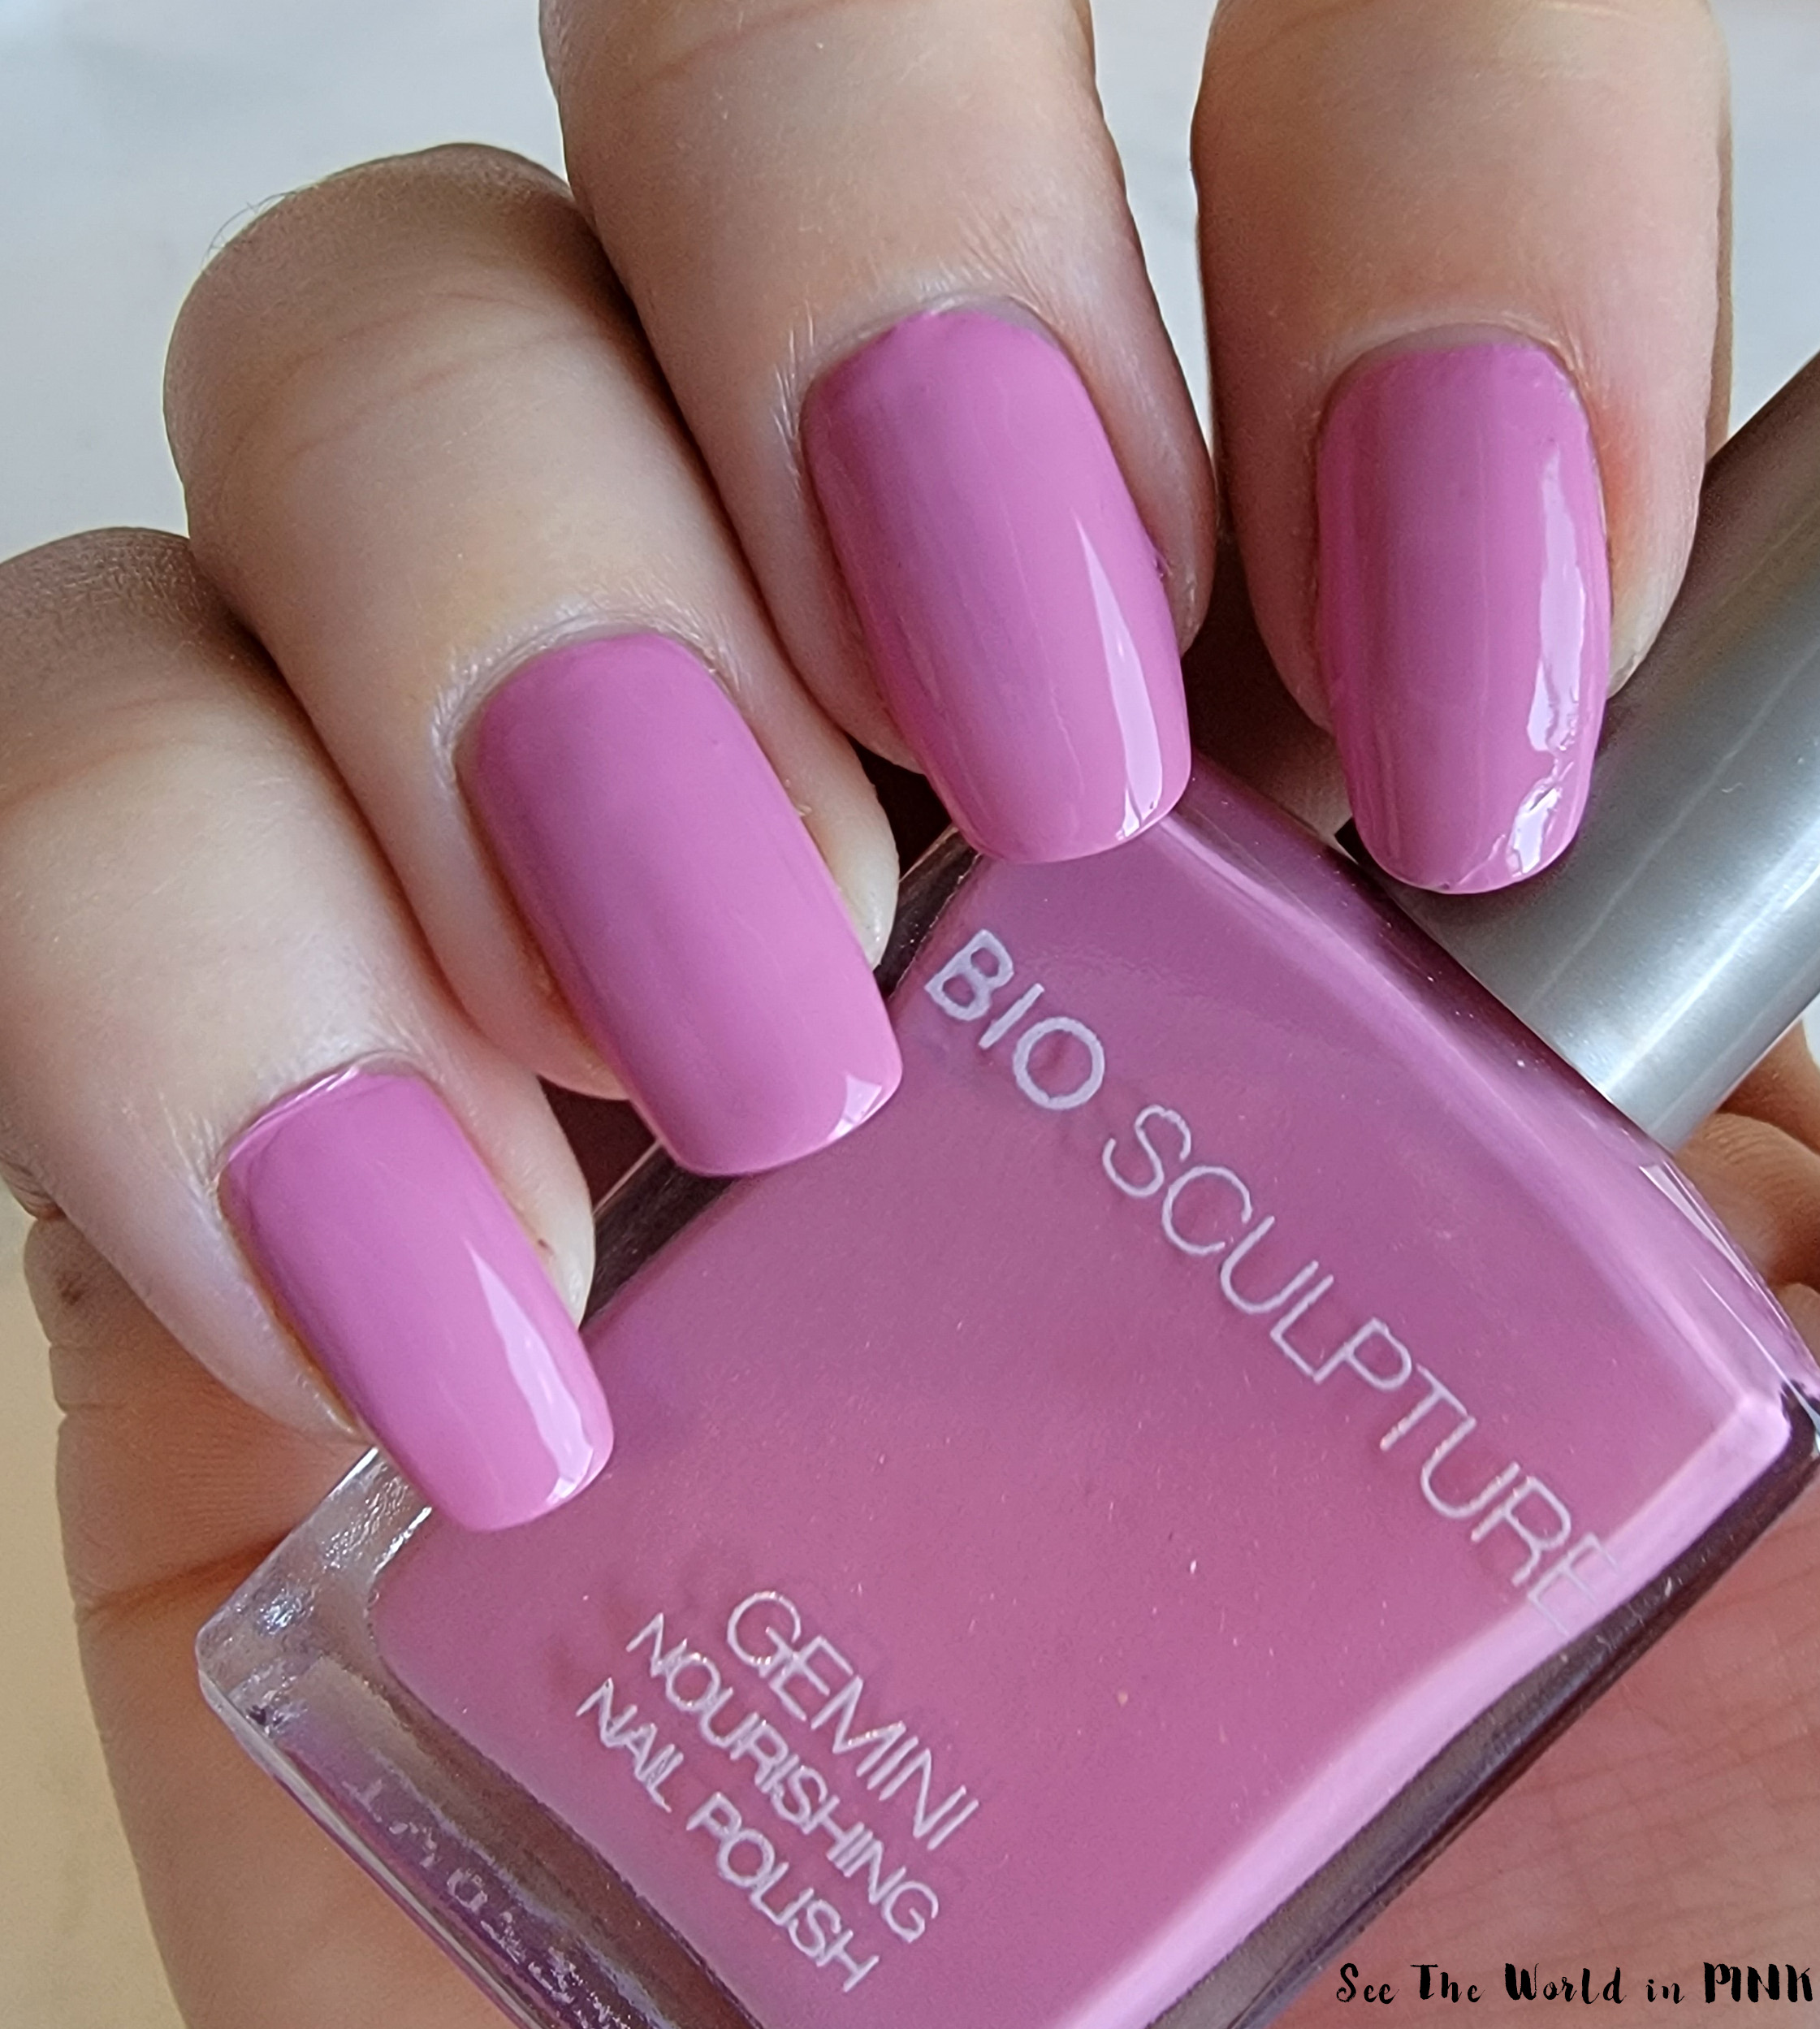 Manicure Monday - Bio Sculpture Pride of Nature Collection Swatches